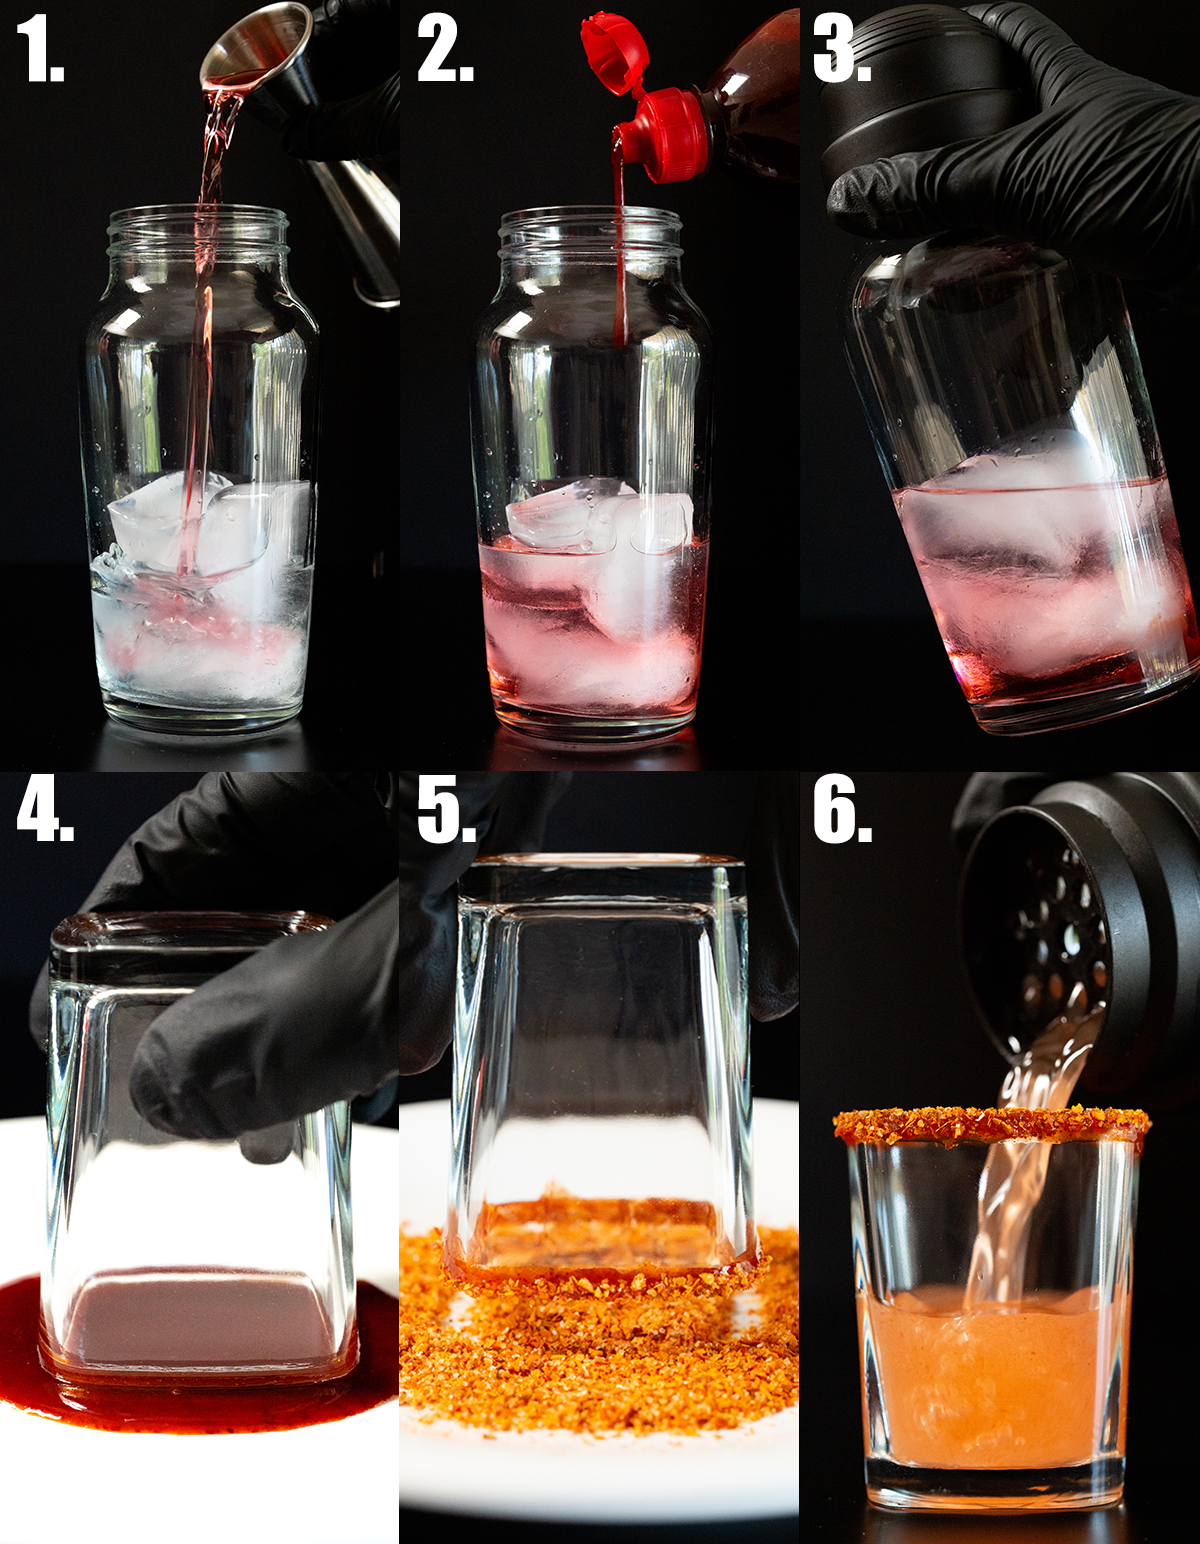 A photo collage showing the six steps to making a Mexican candy shot.